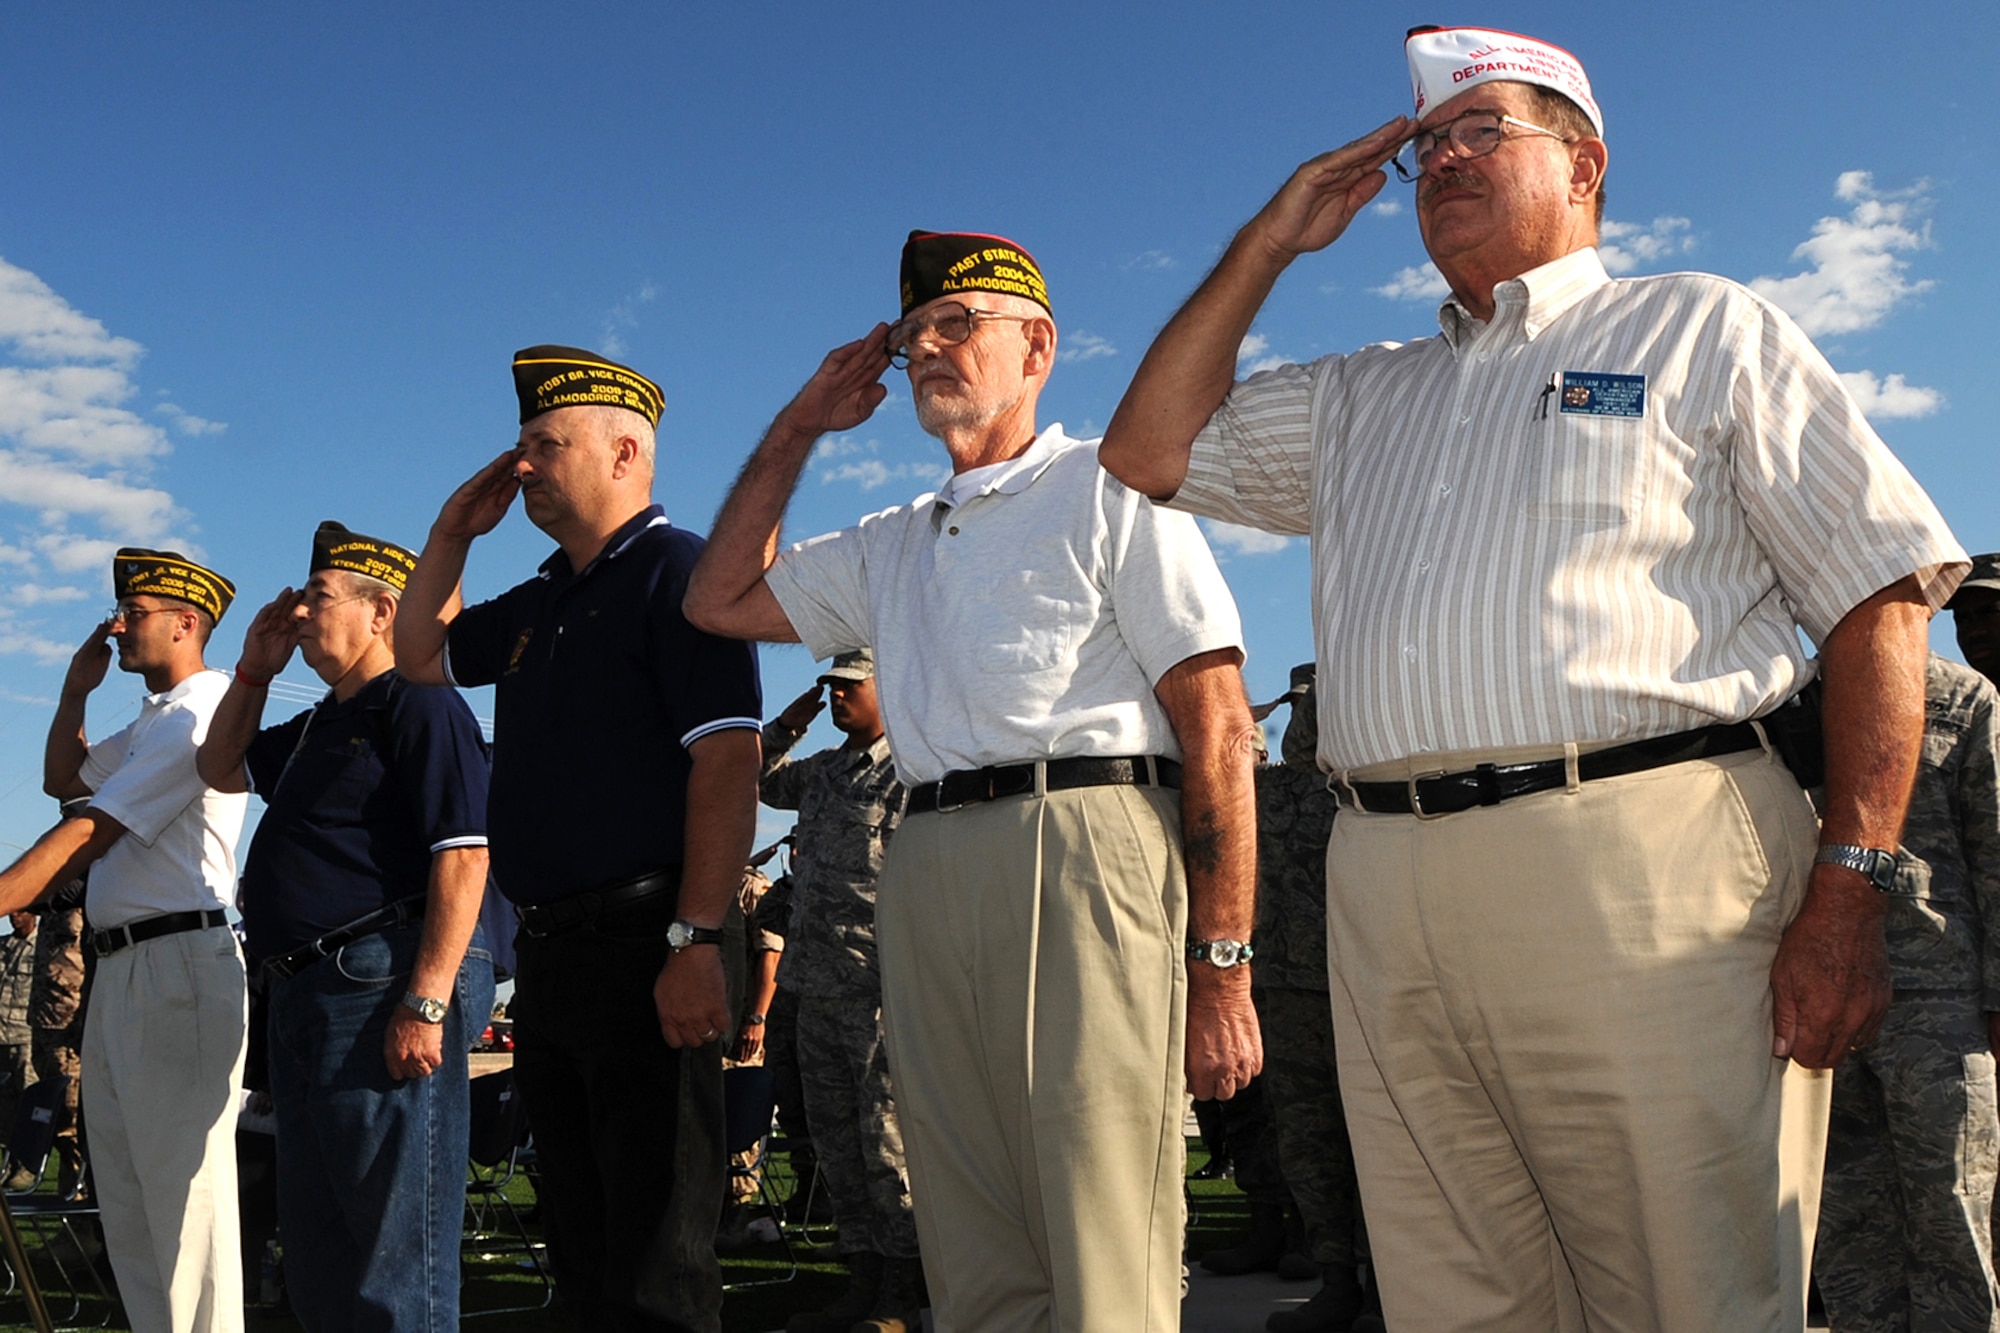 Members of the New Mexico division of the Veterans of Foreign Wars salute The Colors during the Prisoners of War/ Missing in Action Day ceremony held September 23 at Holloman AFB, N.M. (U.S. Air Force photo/ Staff Sgt. Chris Flahive)